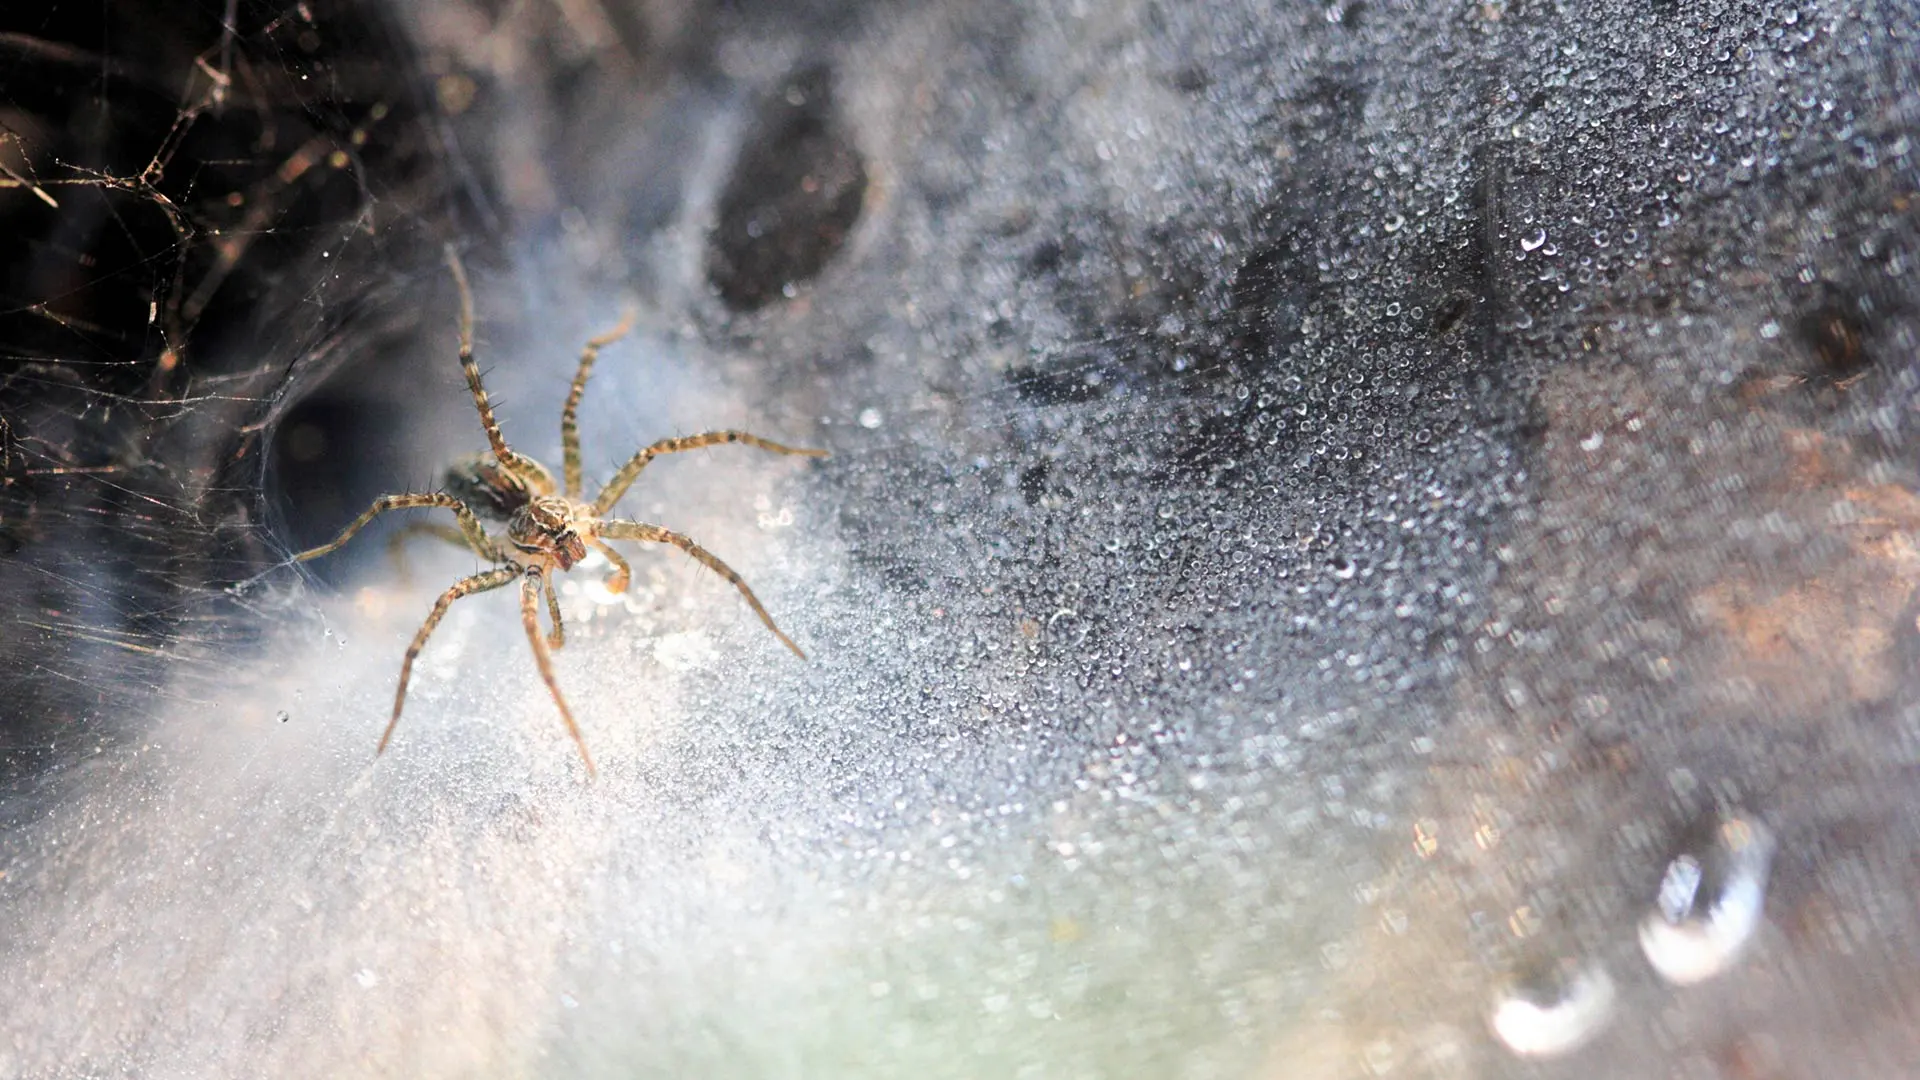 Seeing Spiders in Your Home or Business? Here’s How to Keep Them Out!